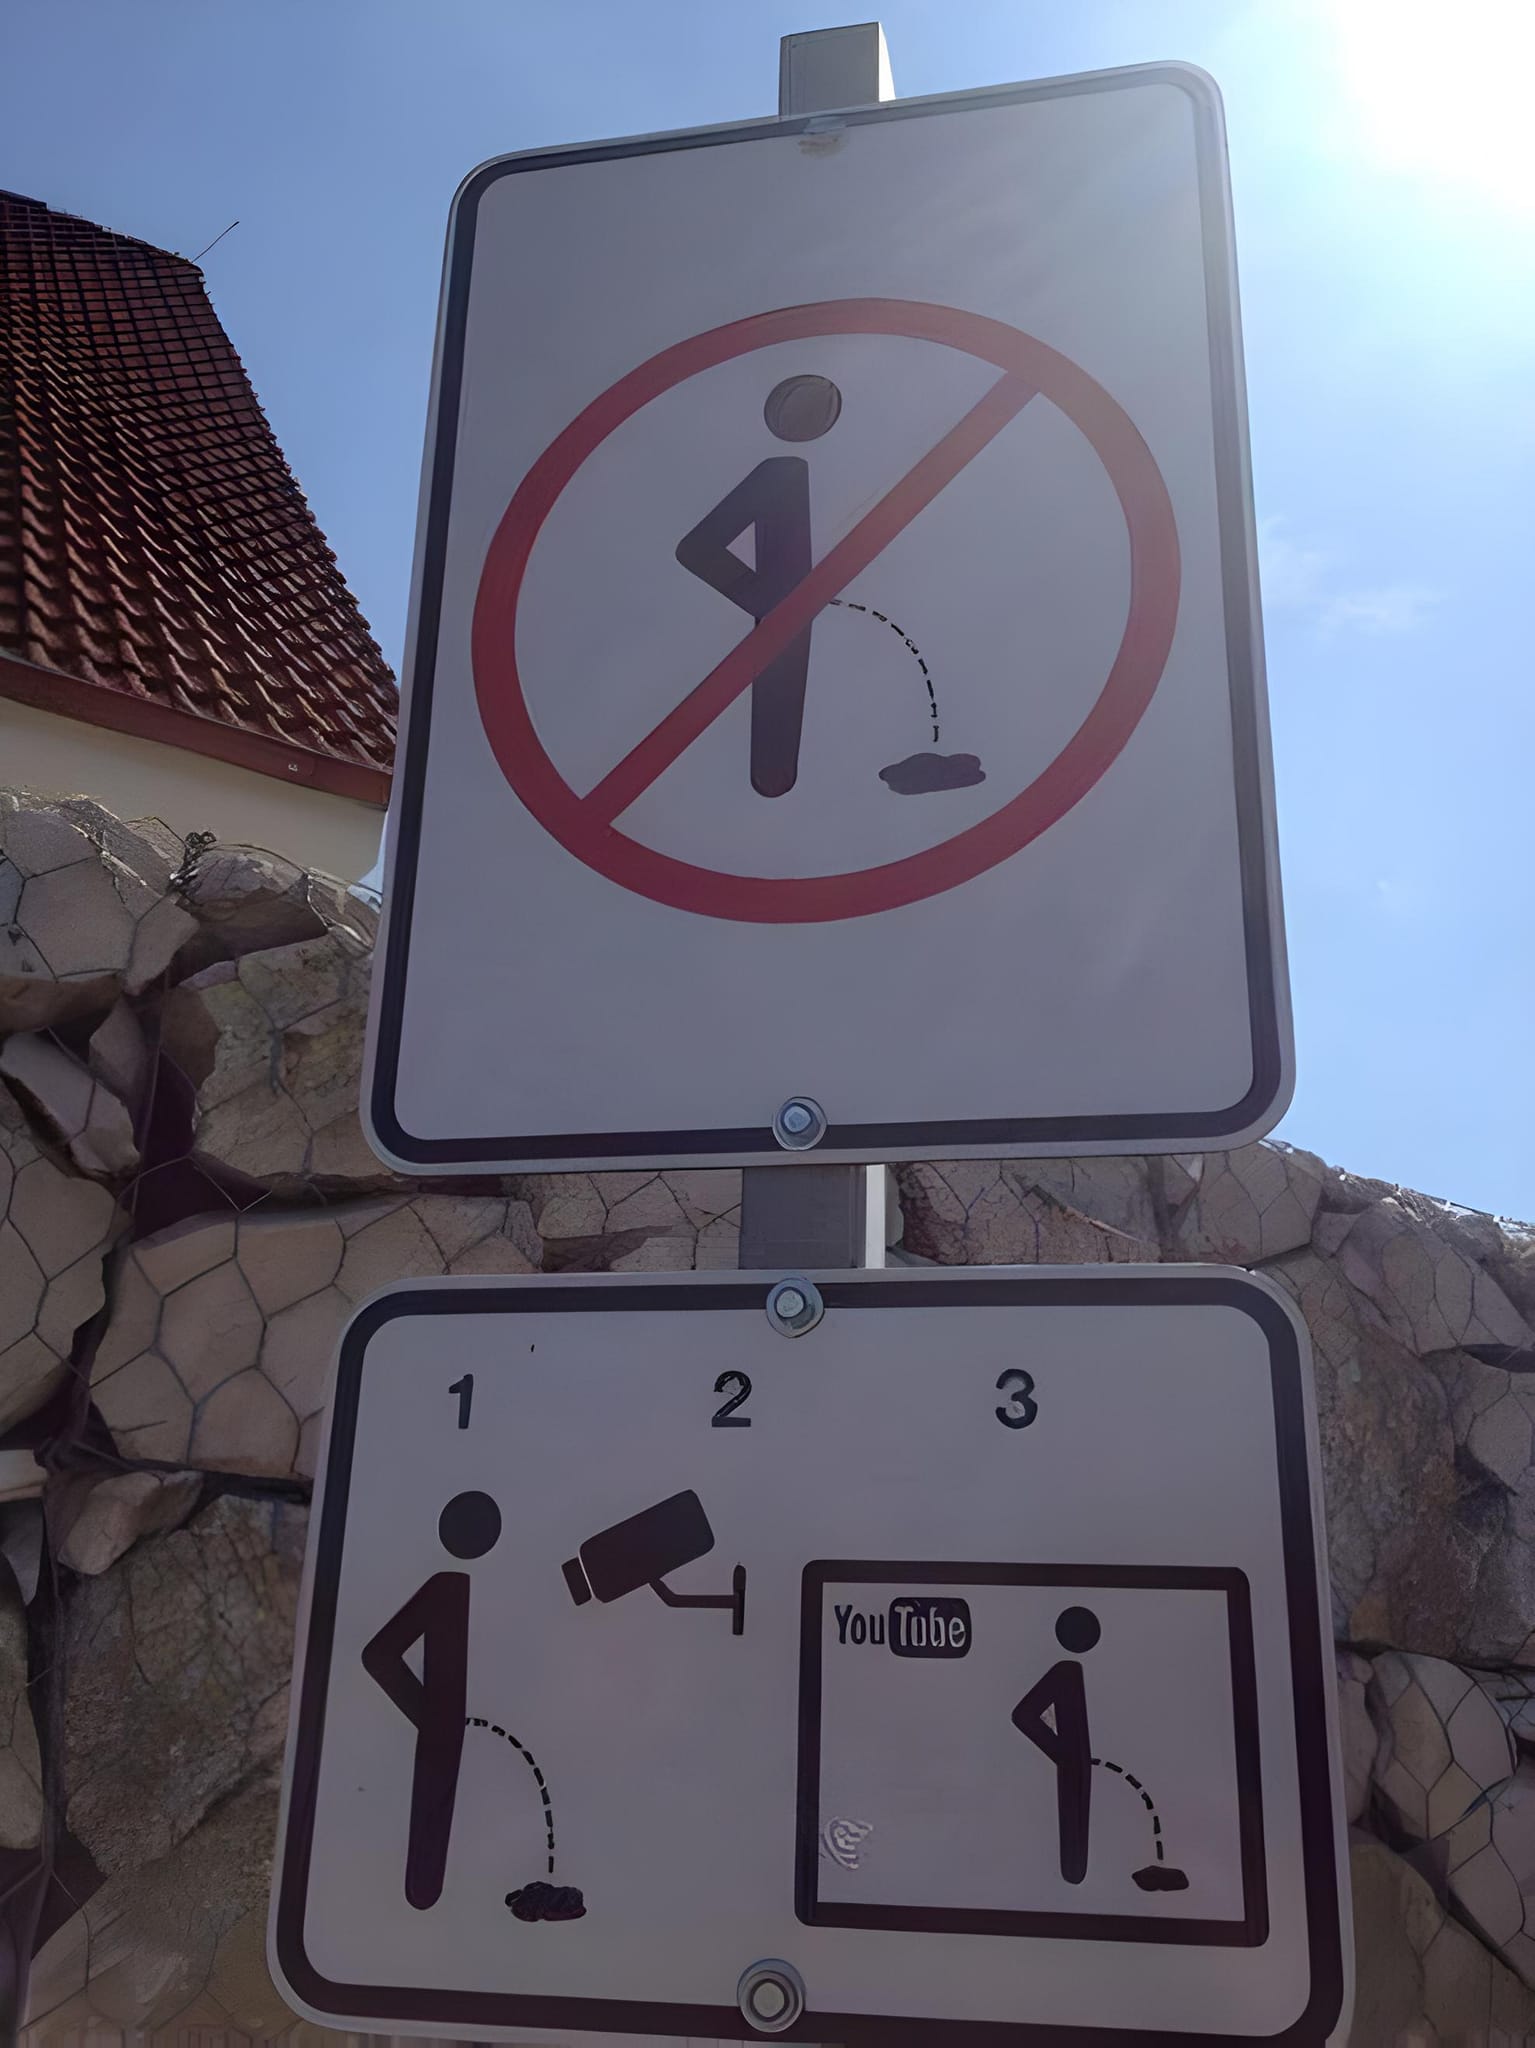 This would be a great sign to have! no peeing sign or you will be video recorded and it will be uploaded to youtube dank memes